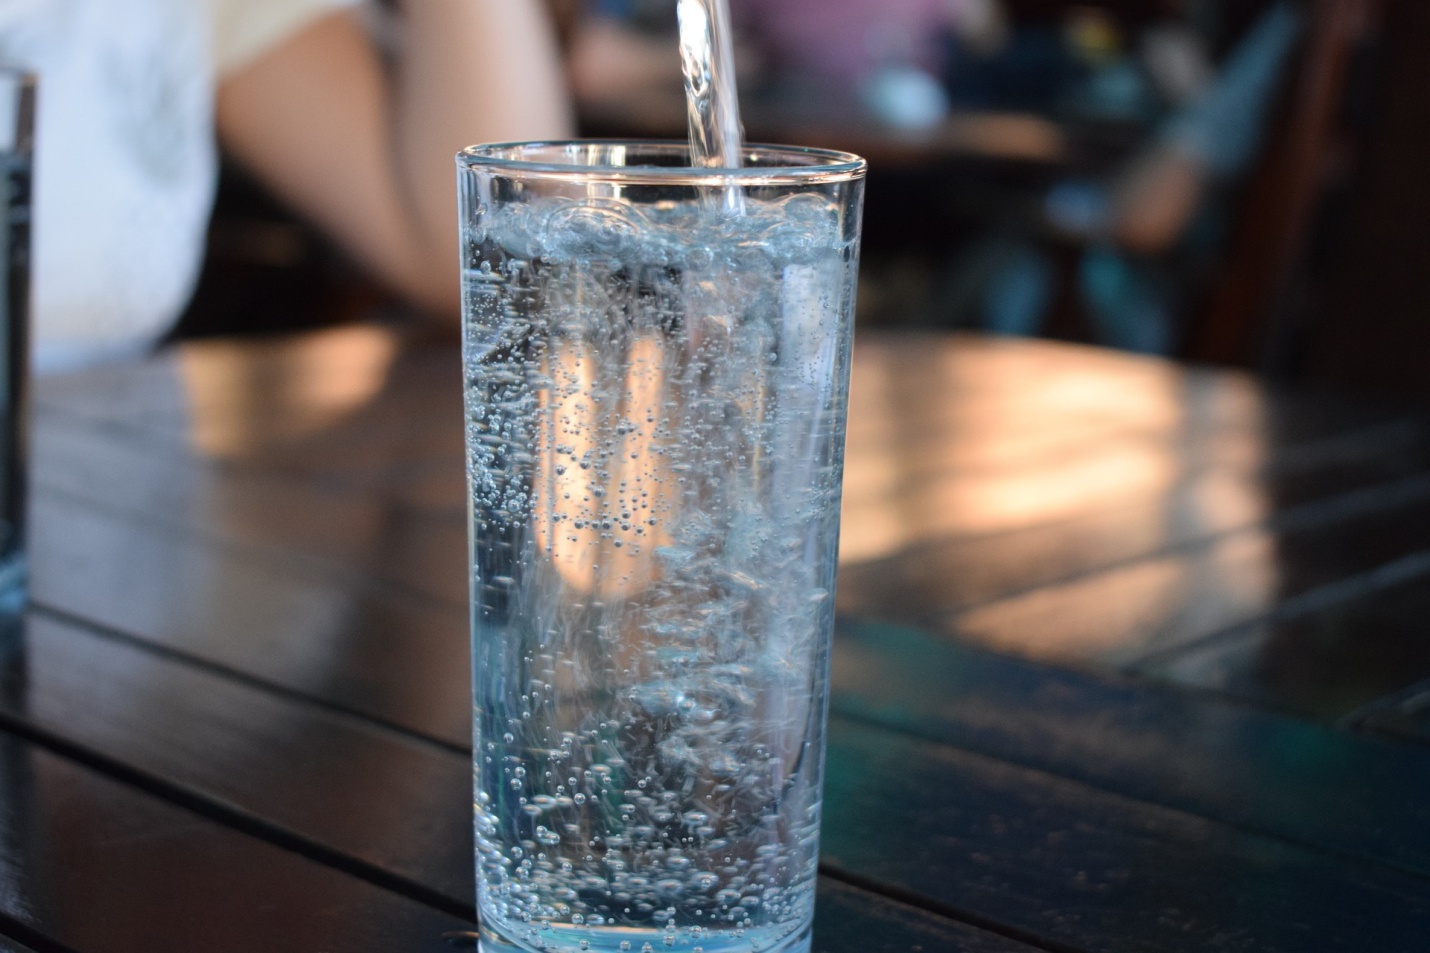 Are you confused about how much water you should drink before a blood test? Read this blog to find out the right amount.